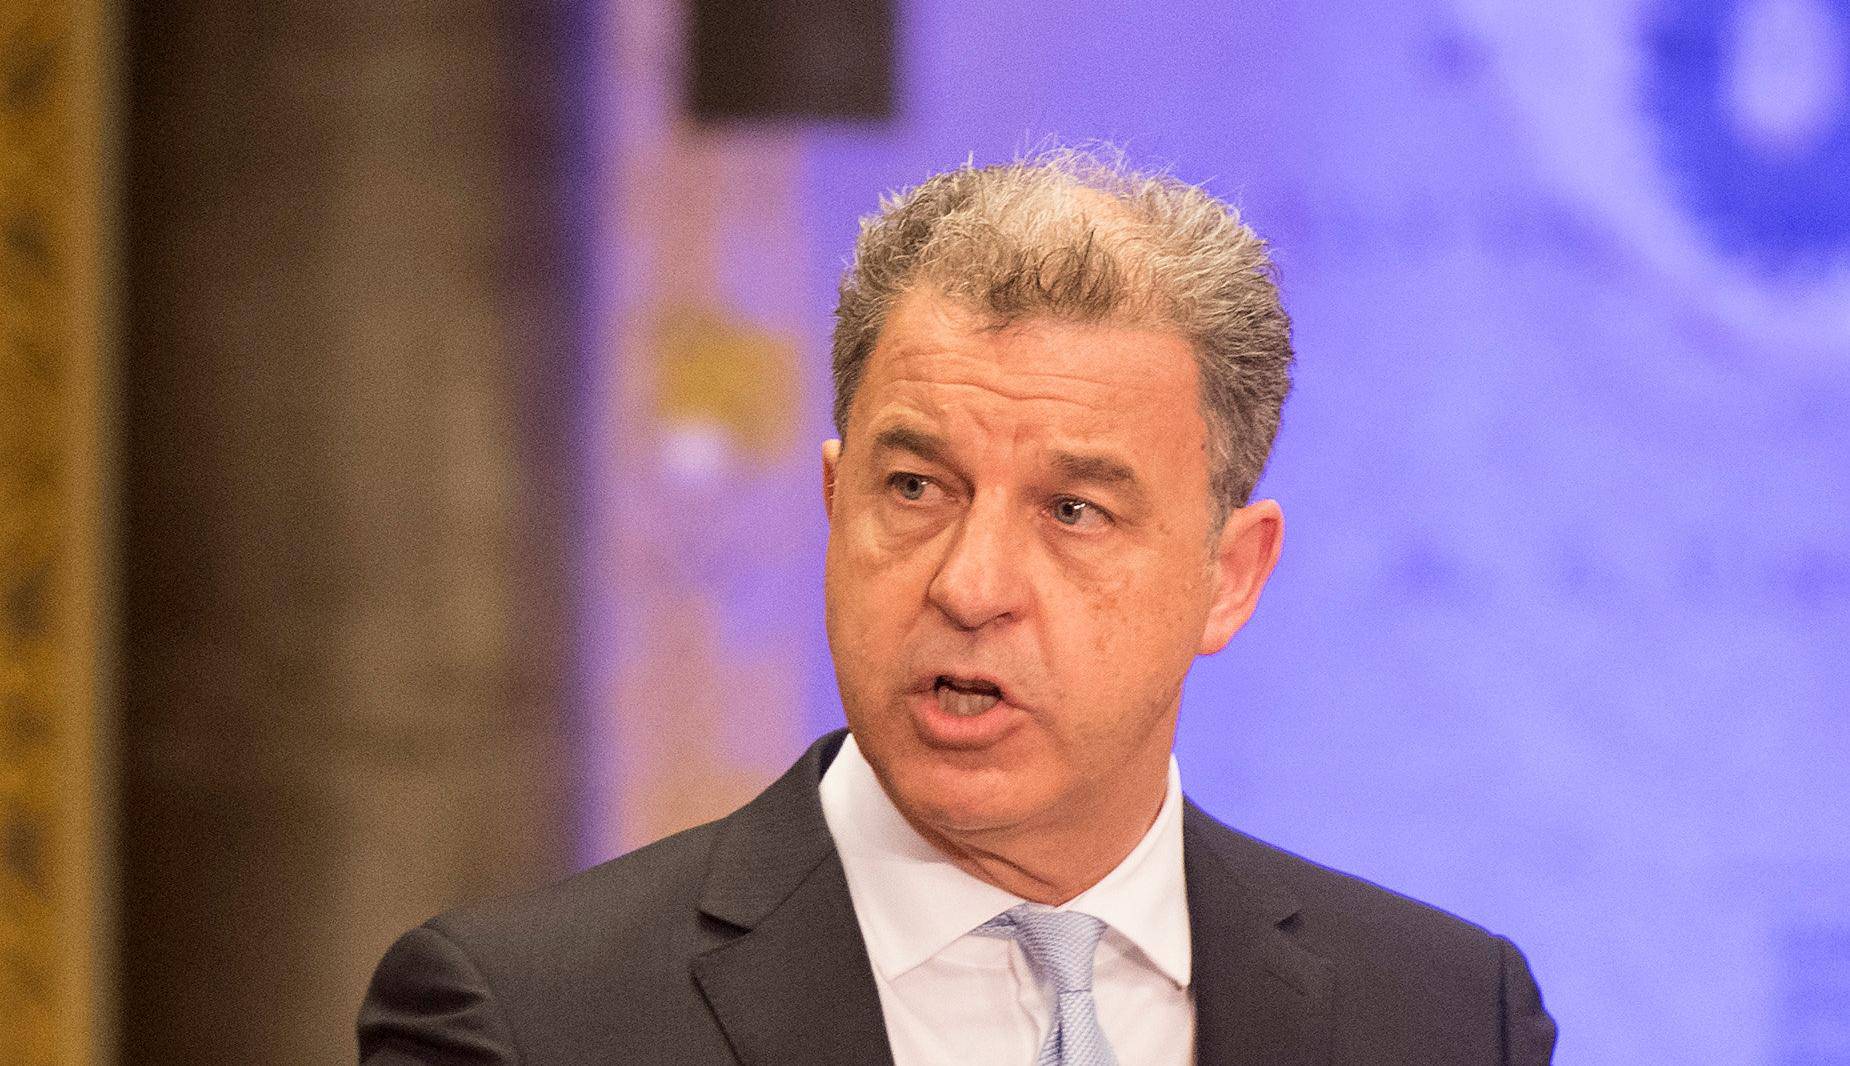 Serge Brammertz, Prosecutor of ICTY and MICT, speaks during a ceremony marking the closure of the U.N. tribunal for the former Yugoslavia in The Hague